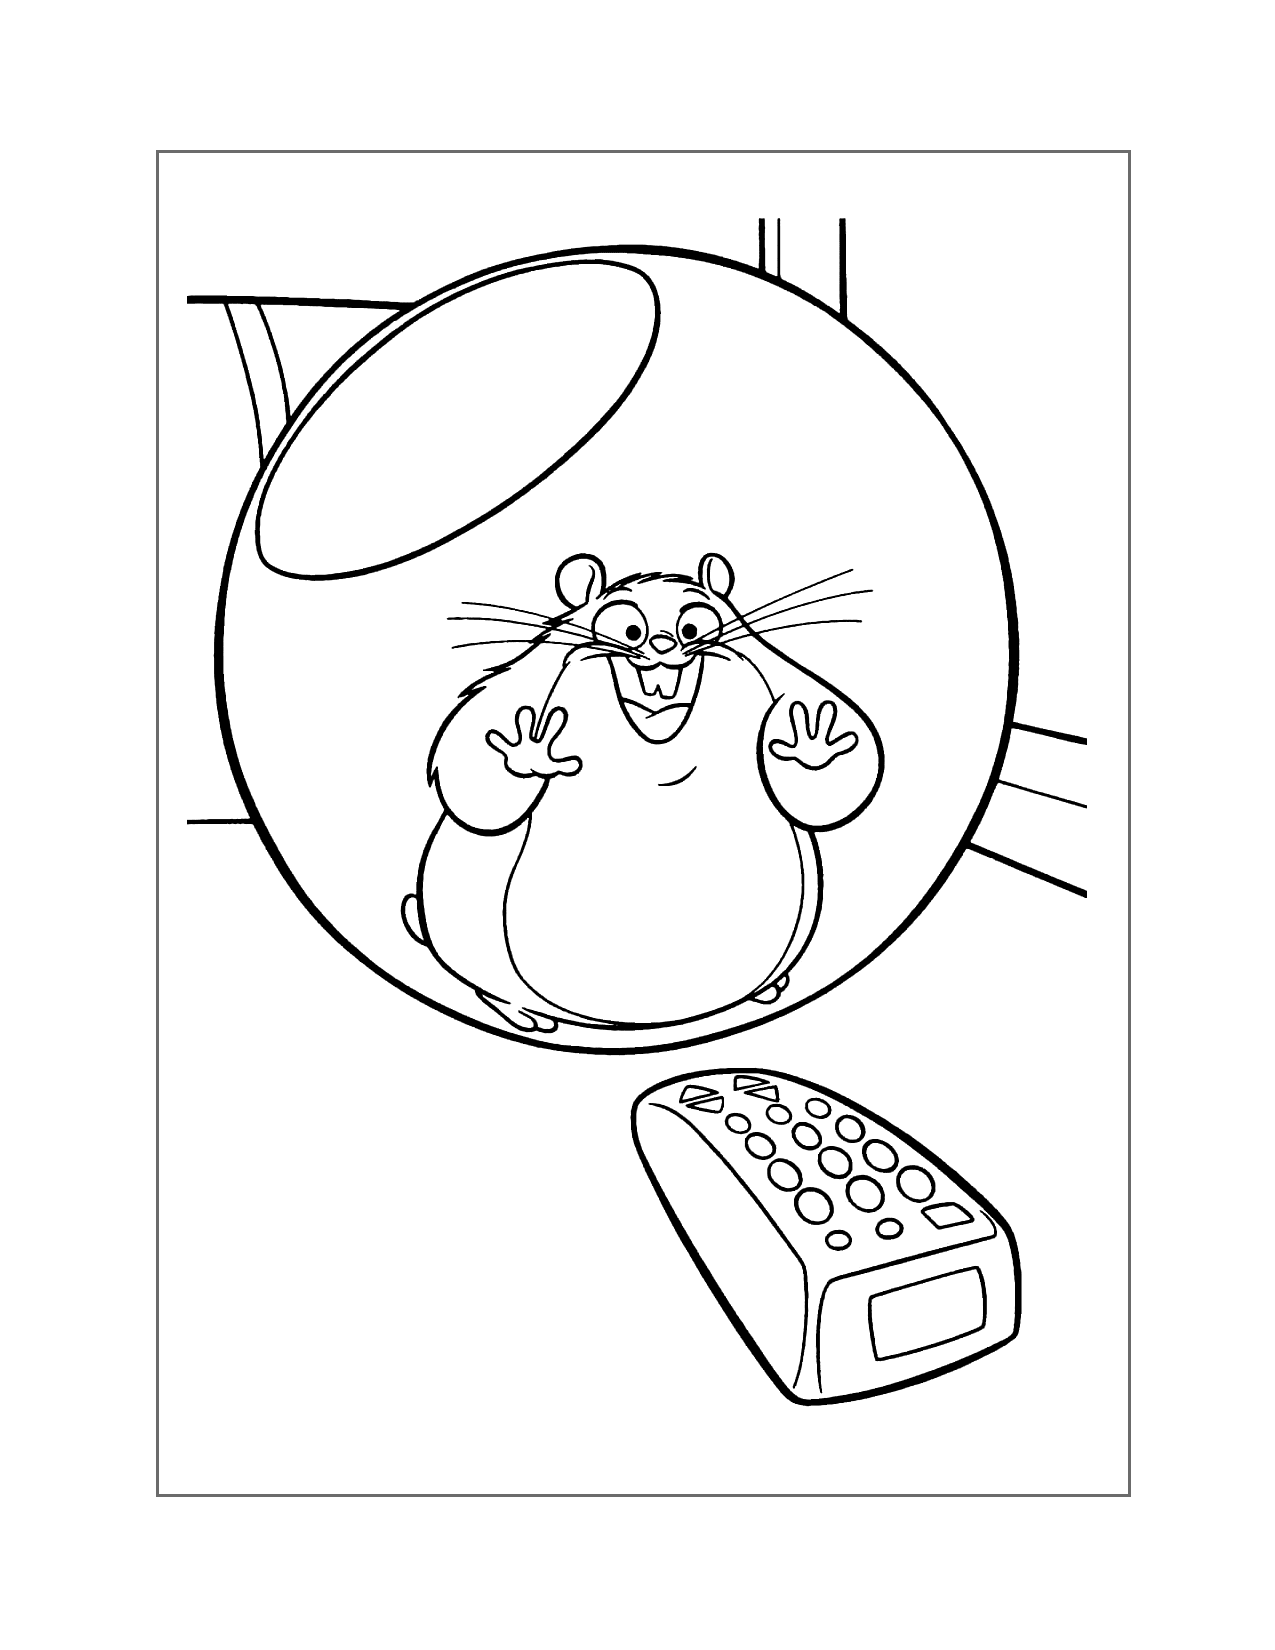 Hamster In A Ball Coloring Page